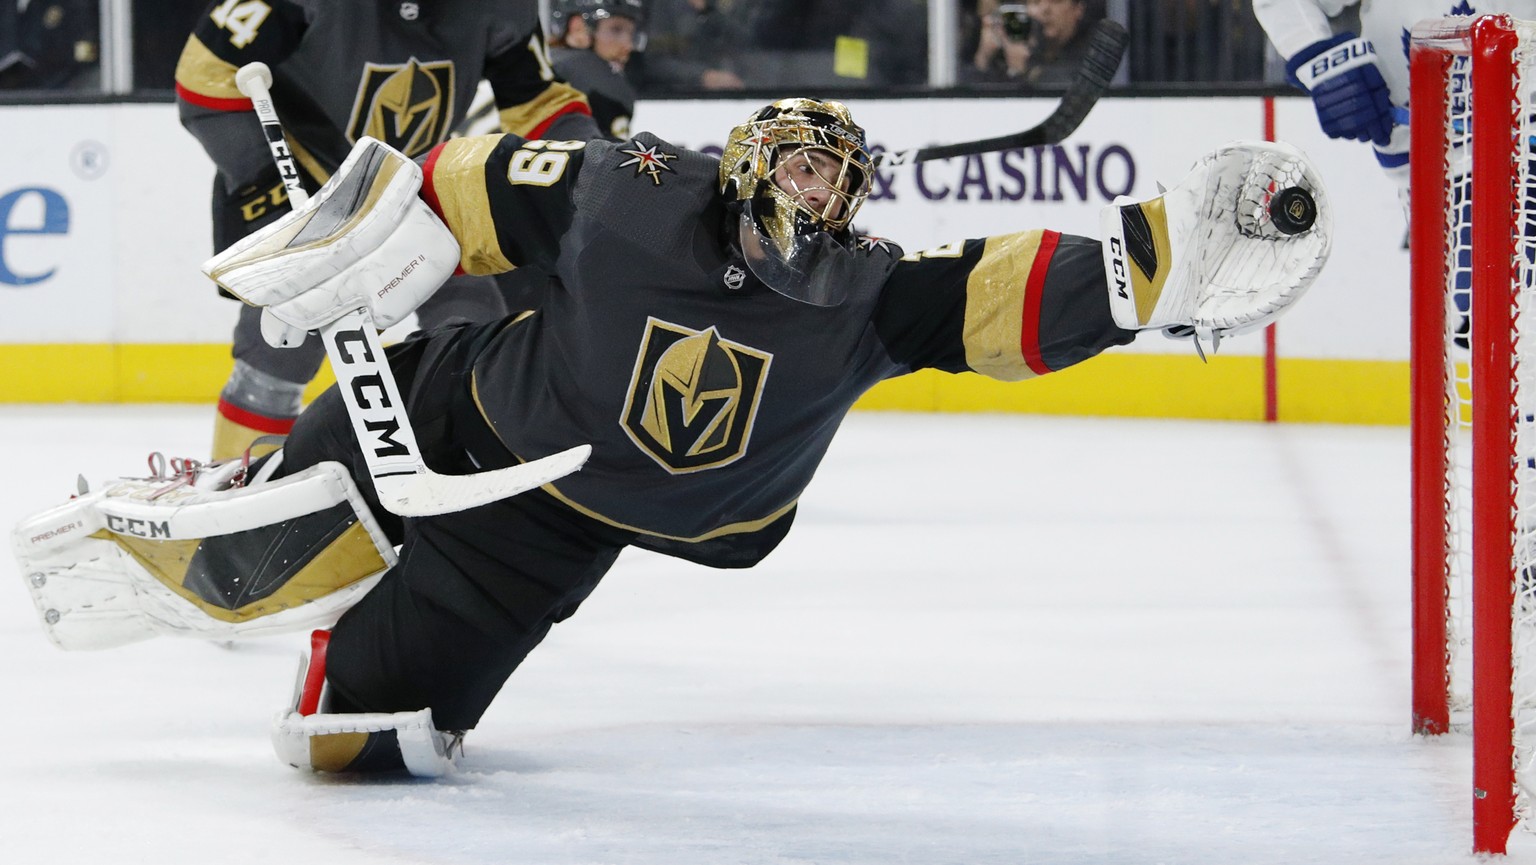 Vegas Golden Knights goaltender Marc-Andre Fleury (29) dives to make a glove save against the Toronto Maple Leafs during the third period of an NHL hockey game Tuesday, Nov. 19, 2019, in Las Vegas. (A ...